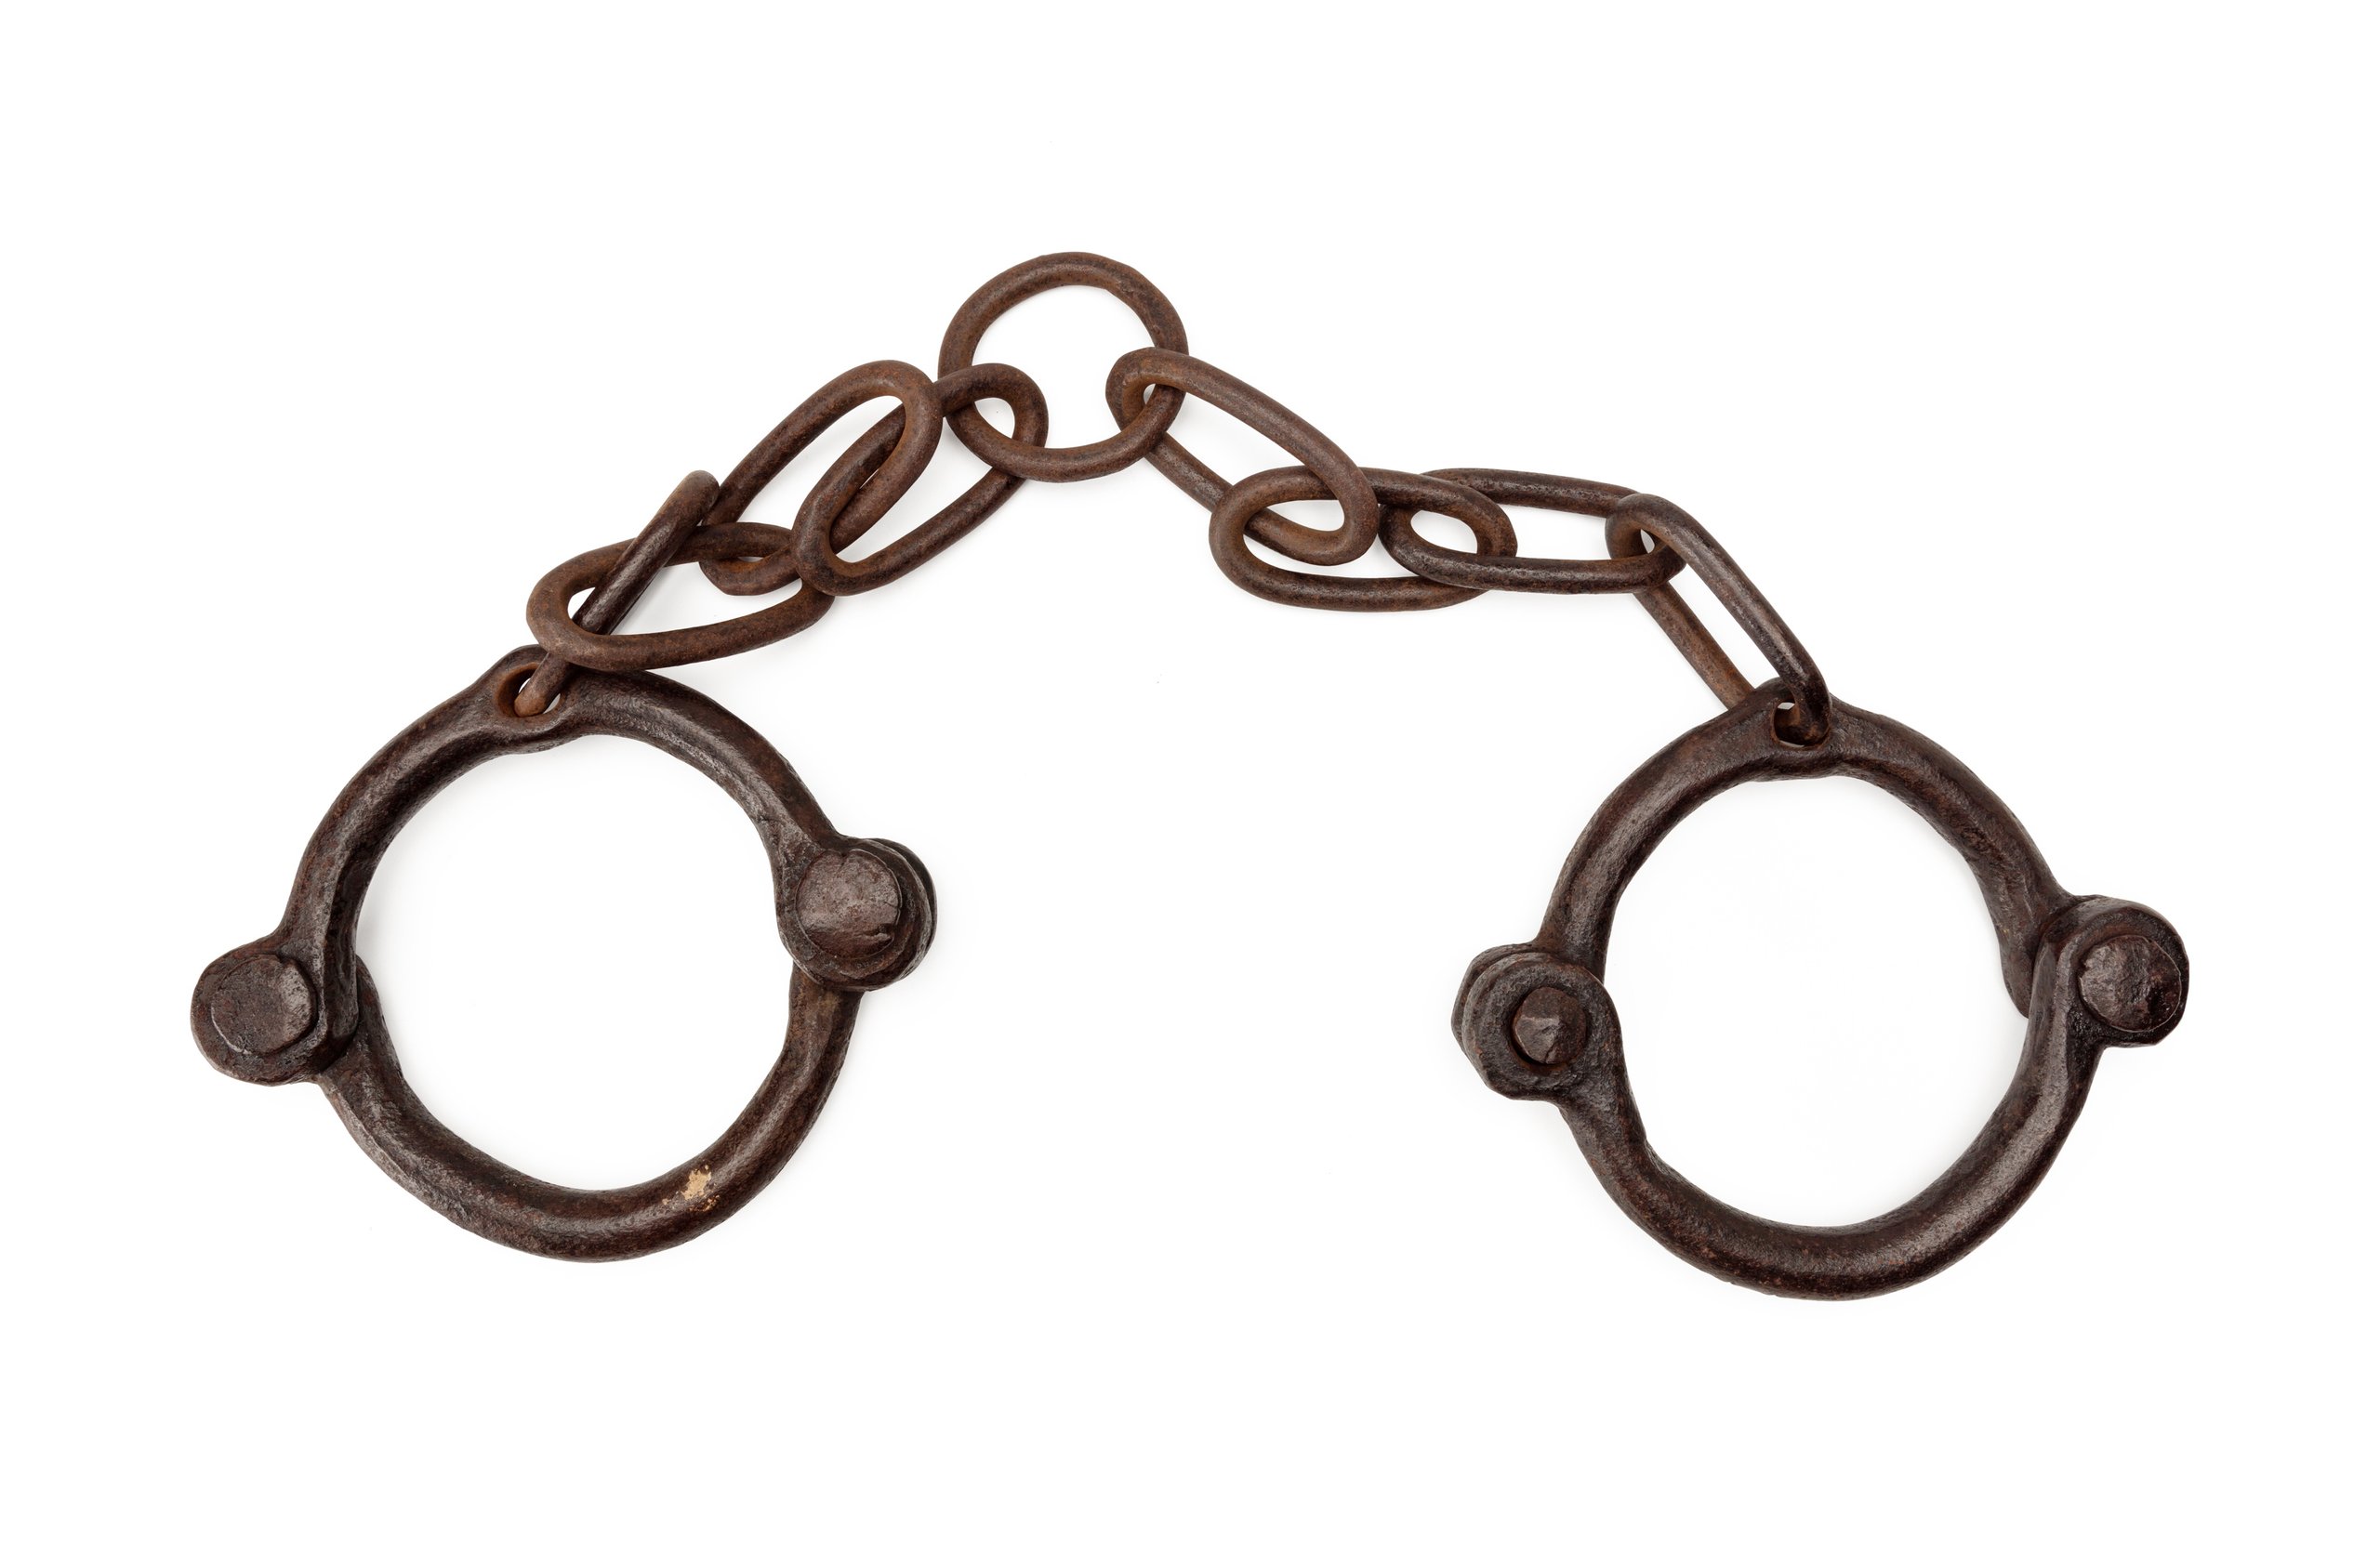 Hand-forged leg manacles